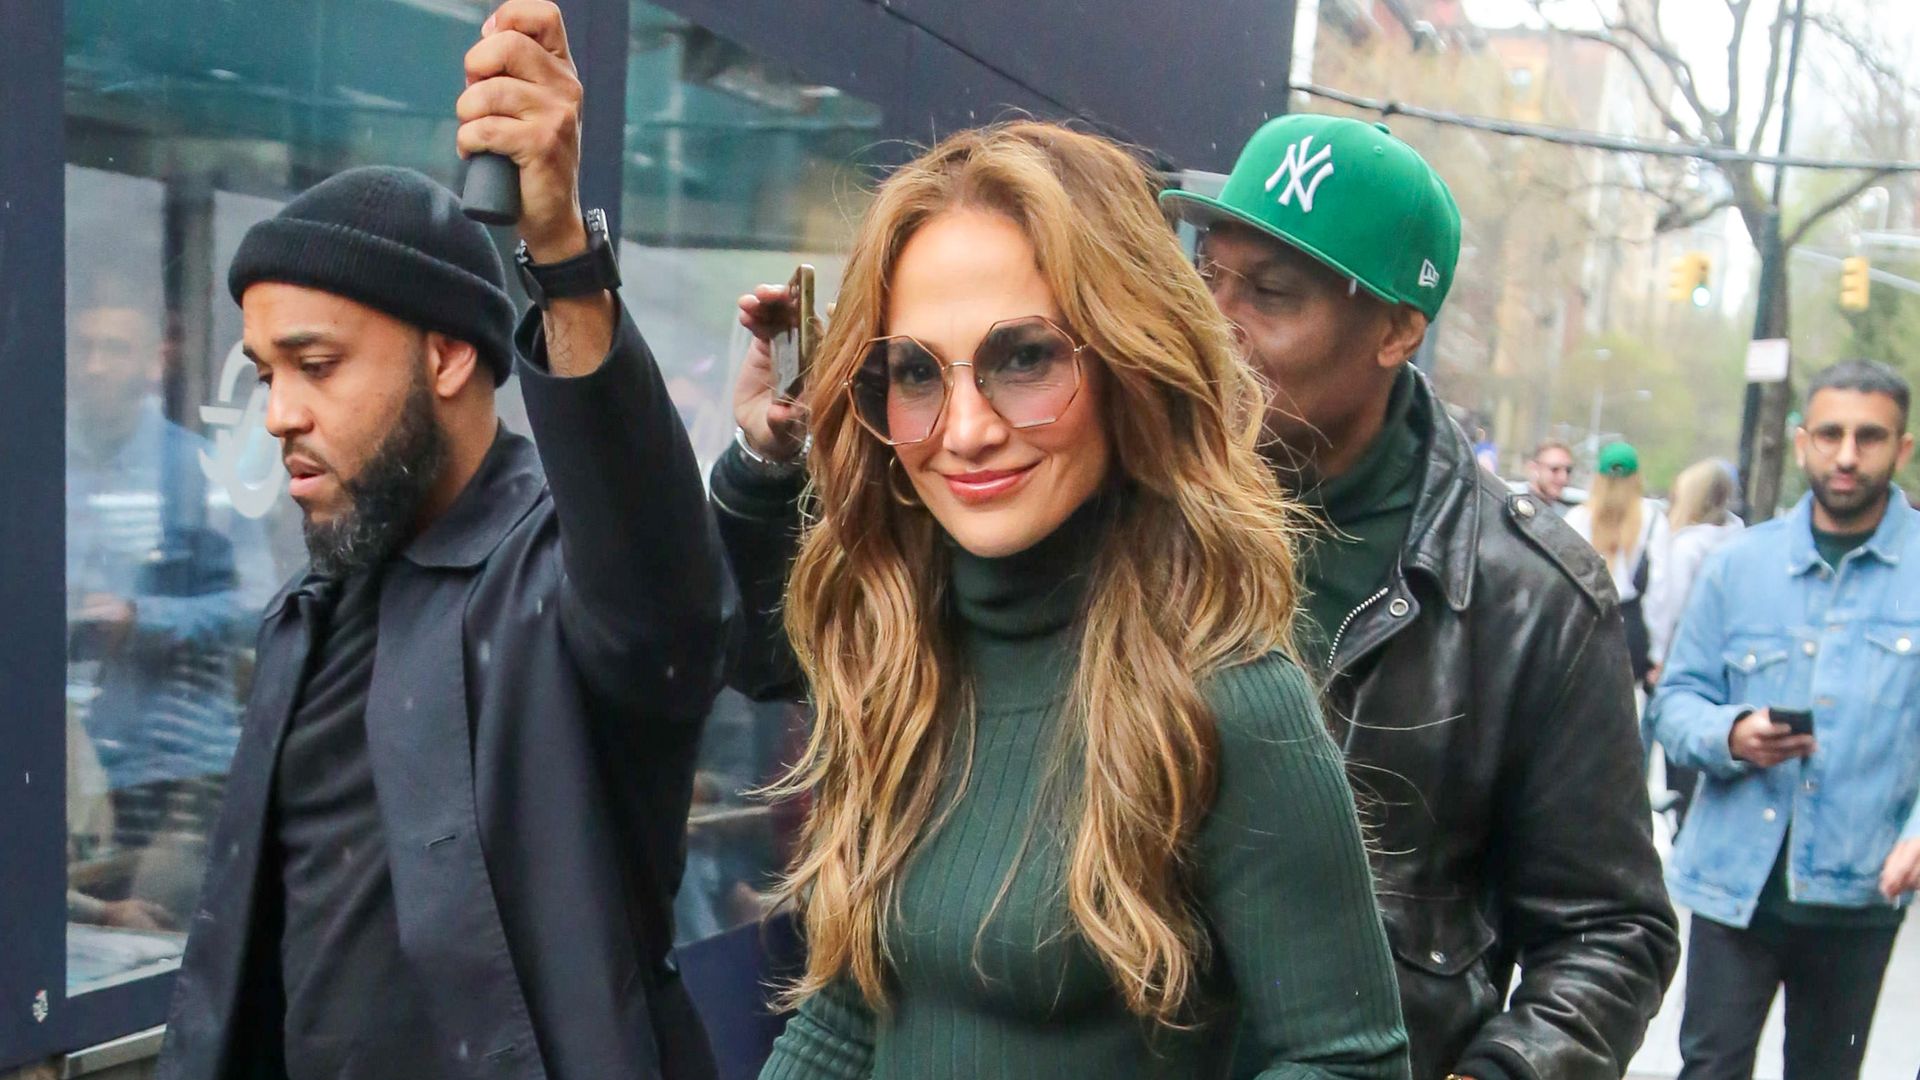 JLo carried a glossy green version of Lady Dior 